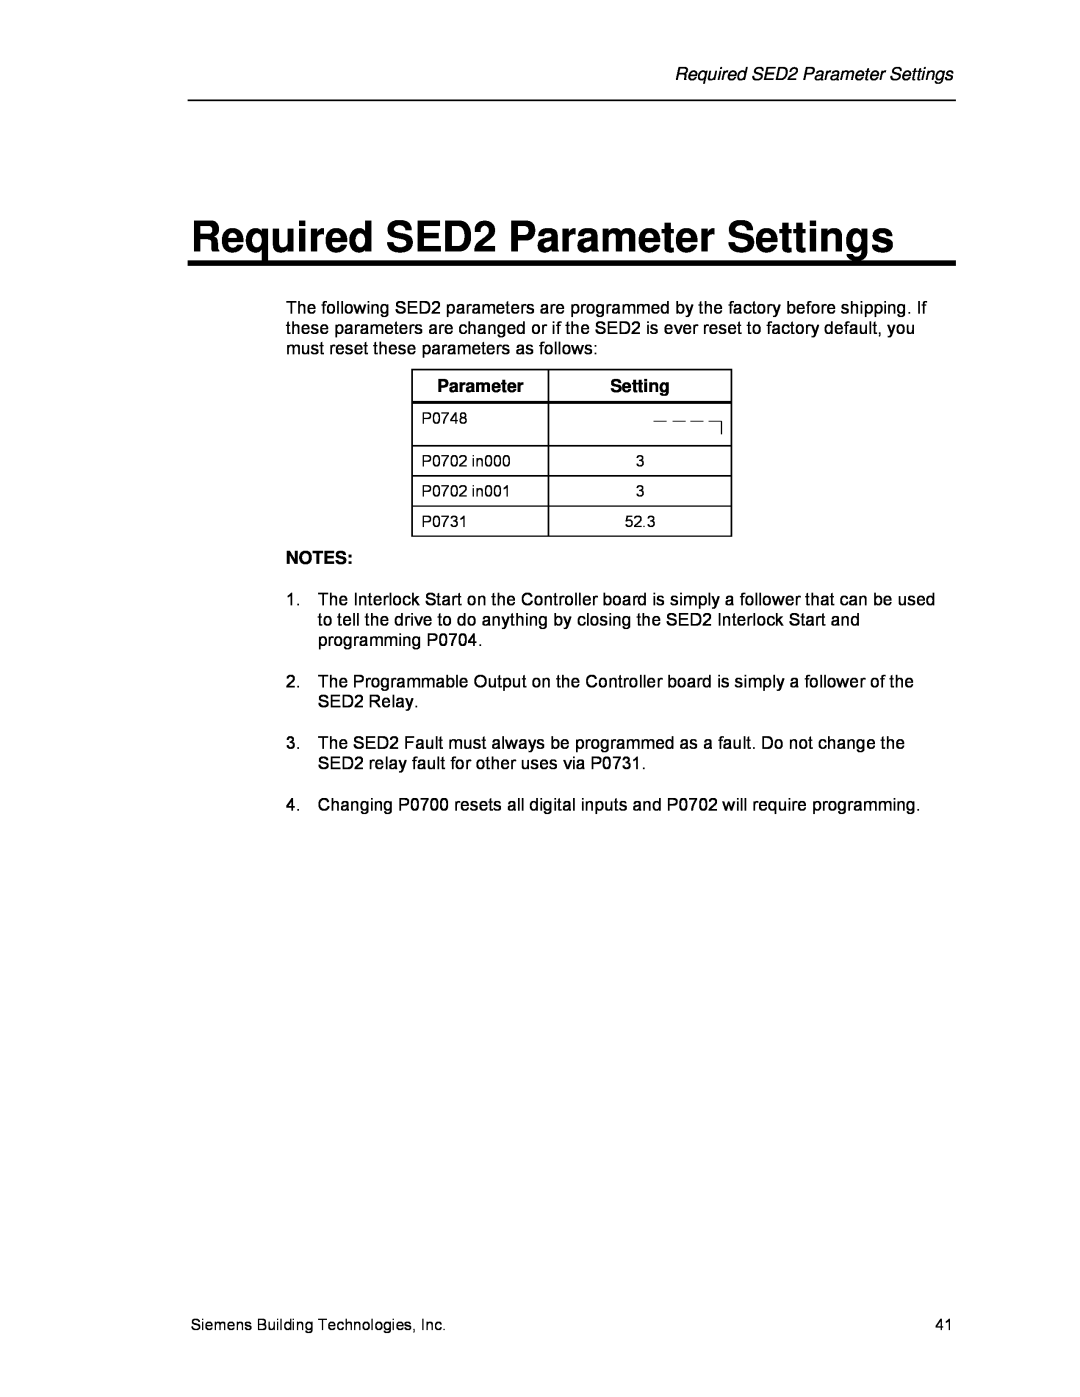 Siemens 125-3208 operating instructions Required SED2 Parameter Settings 